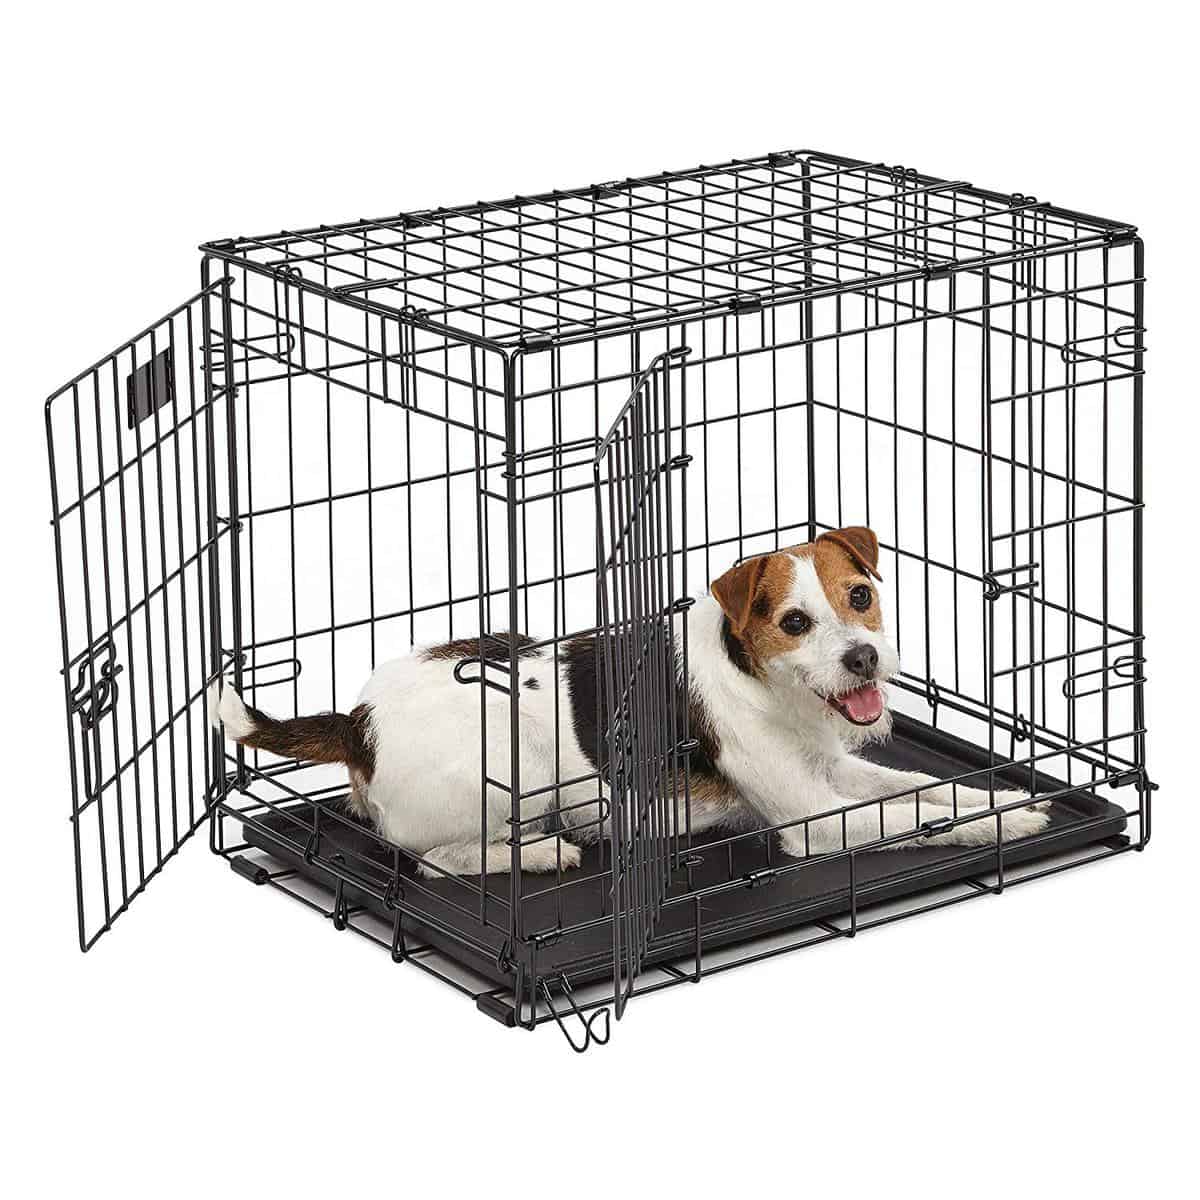 MidWest Homes for Pets Dog Crate | iCrate Single Door & Double Door Folding Metal Dog Crates | Fully Equipped